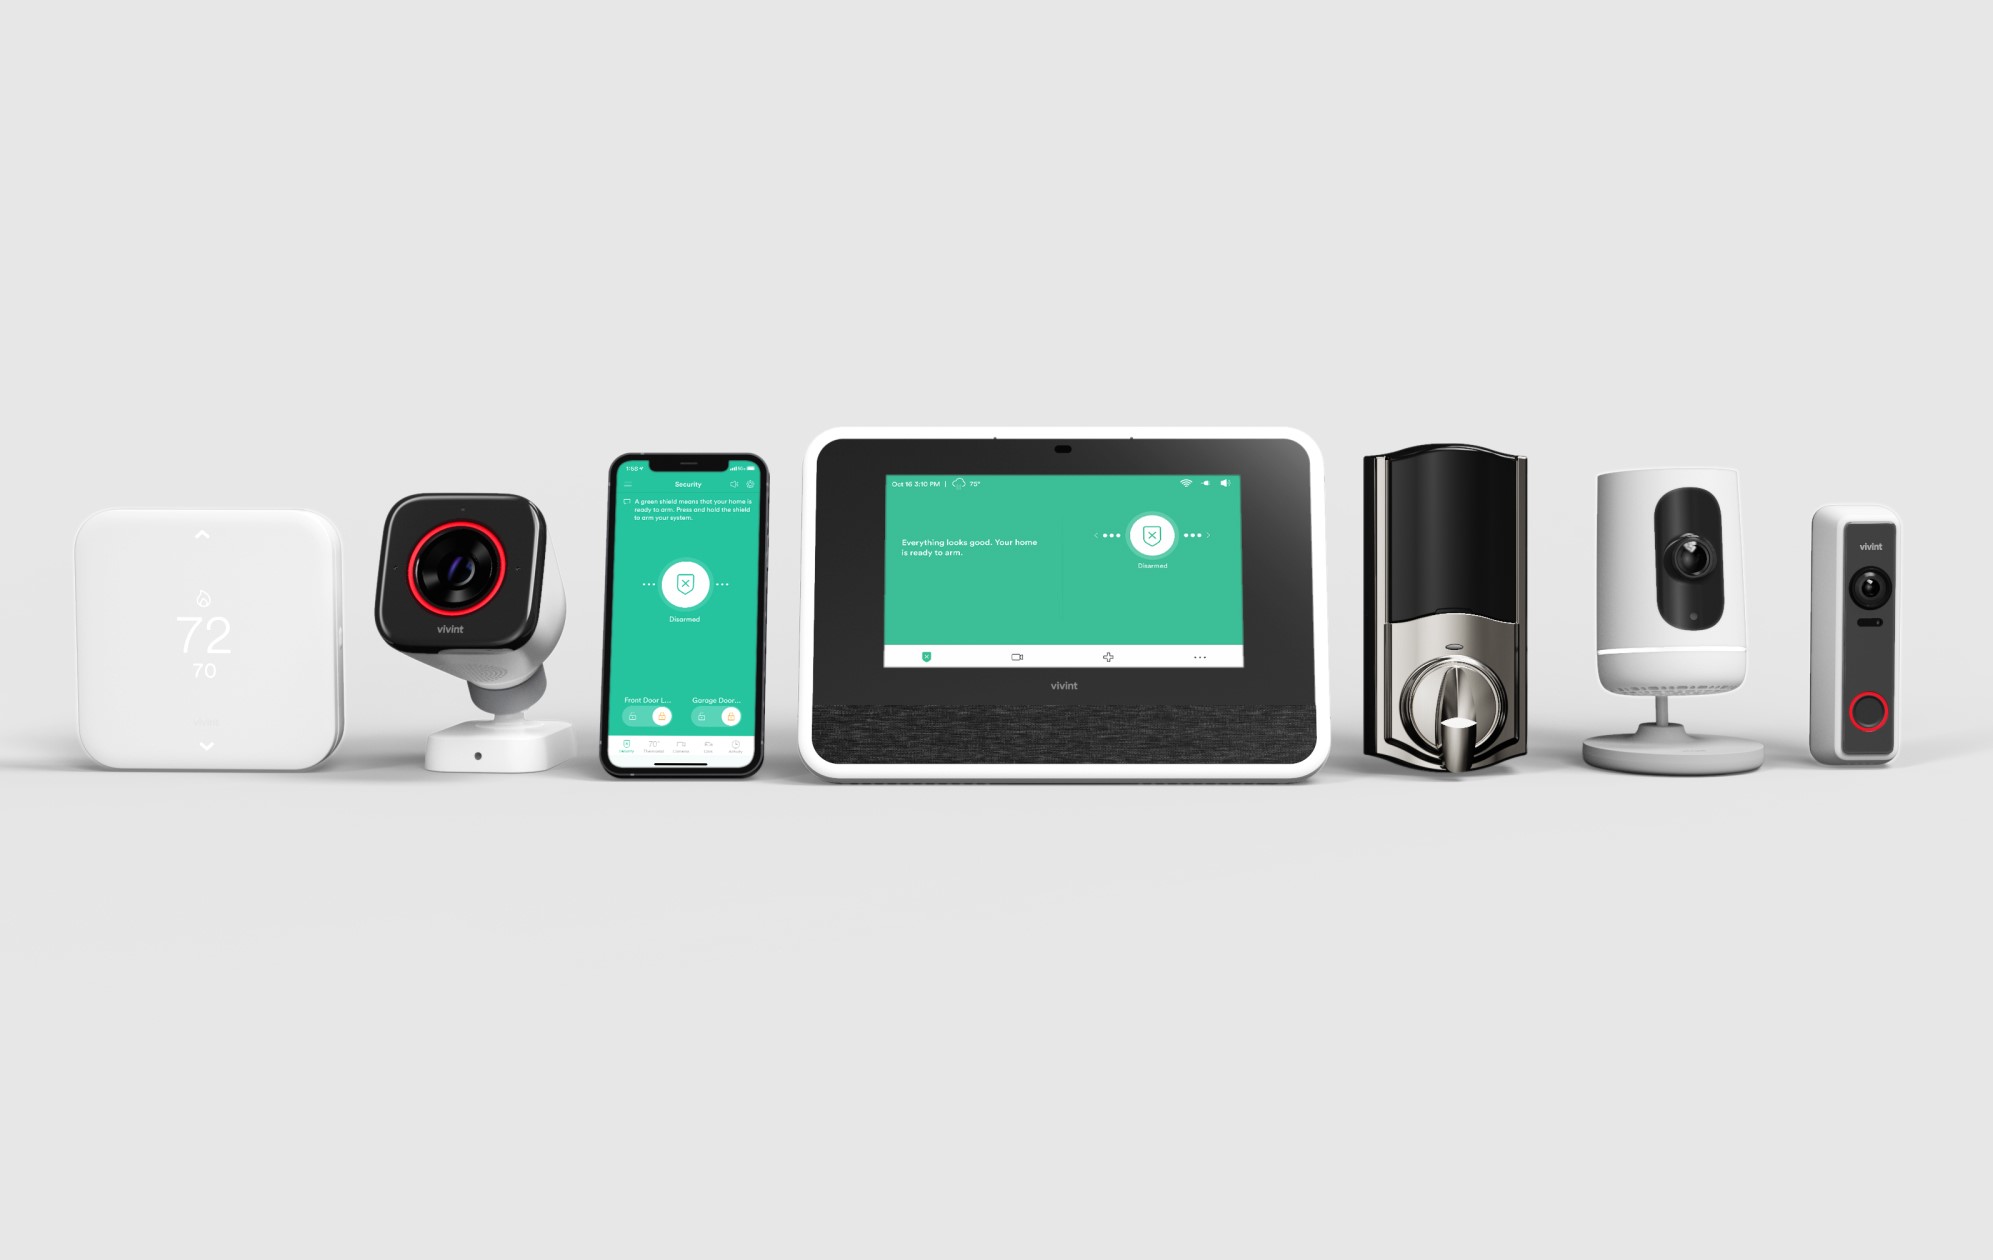 What Video Cameras Can Be Used With Vivint Home Alarm Systems